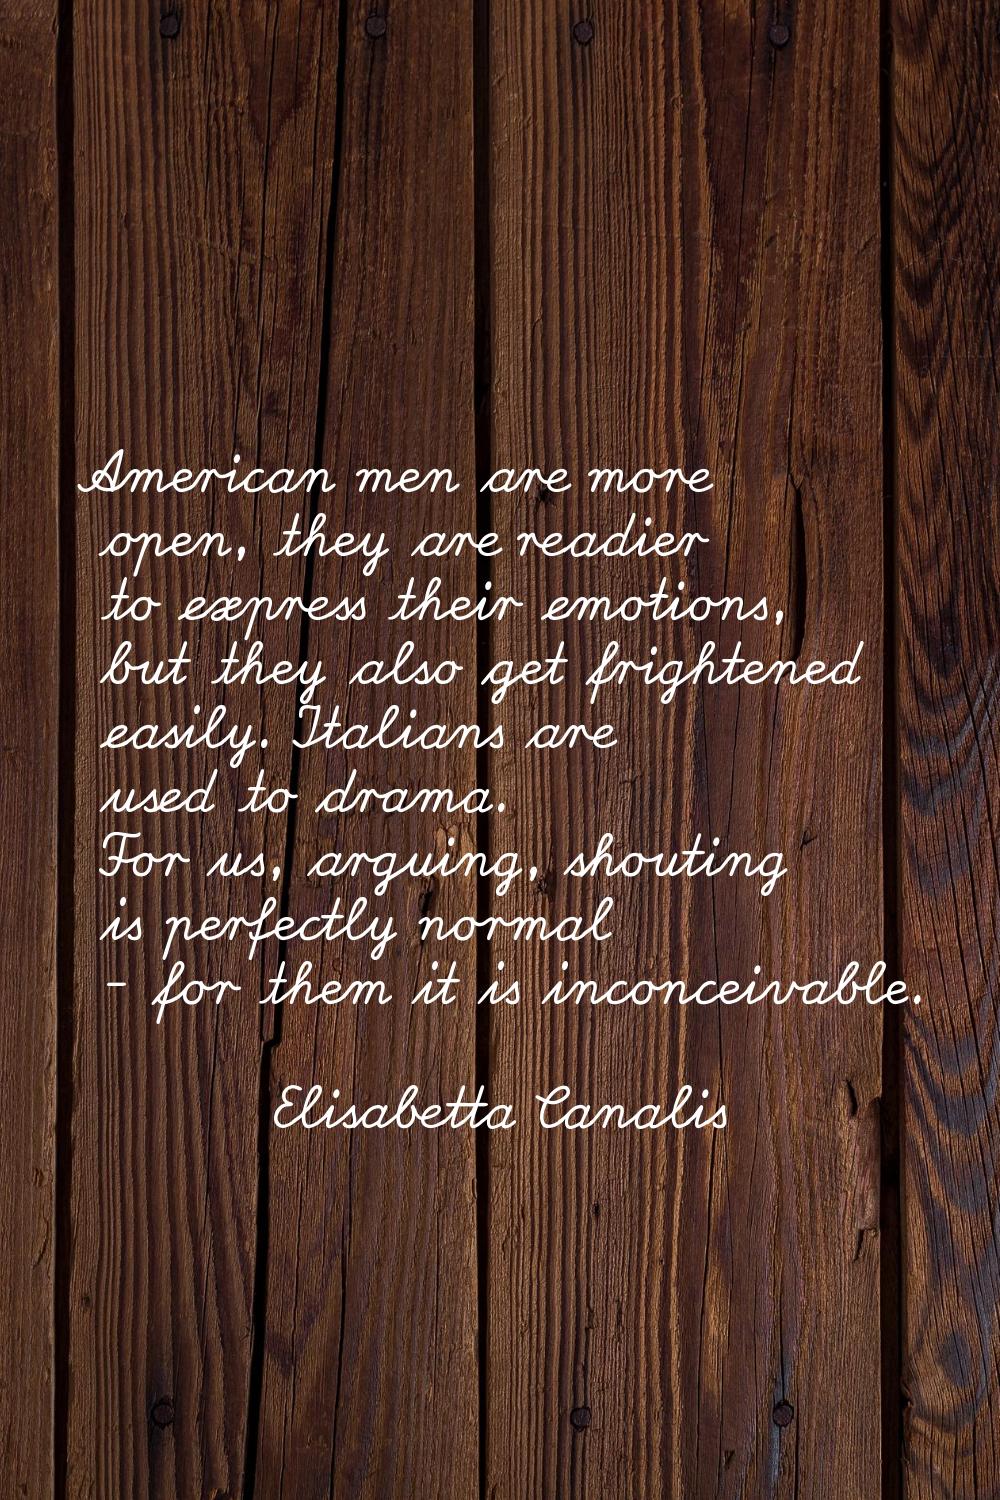 American men are more open, they are readier to express their emotions, but they also get frightene